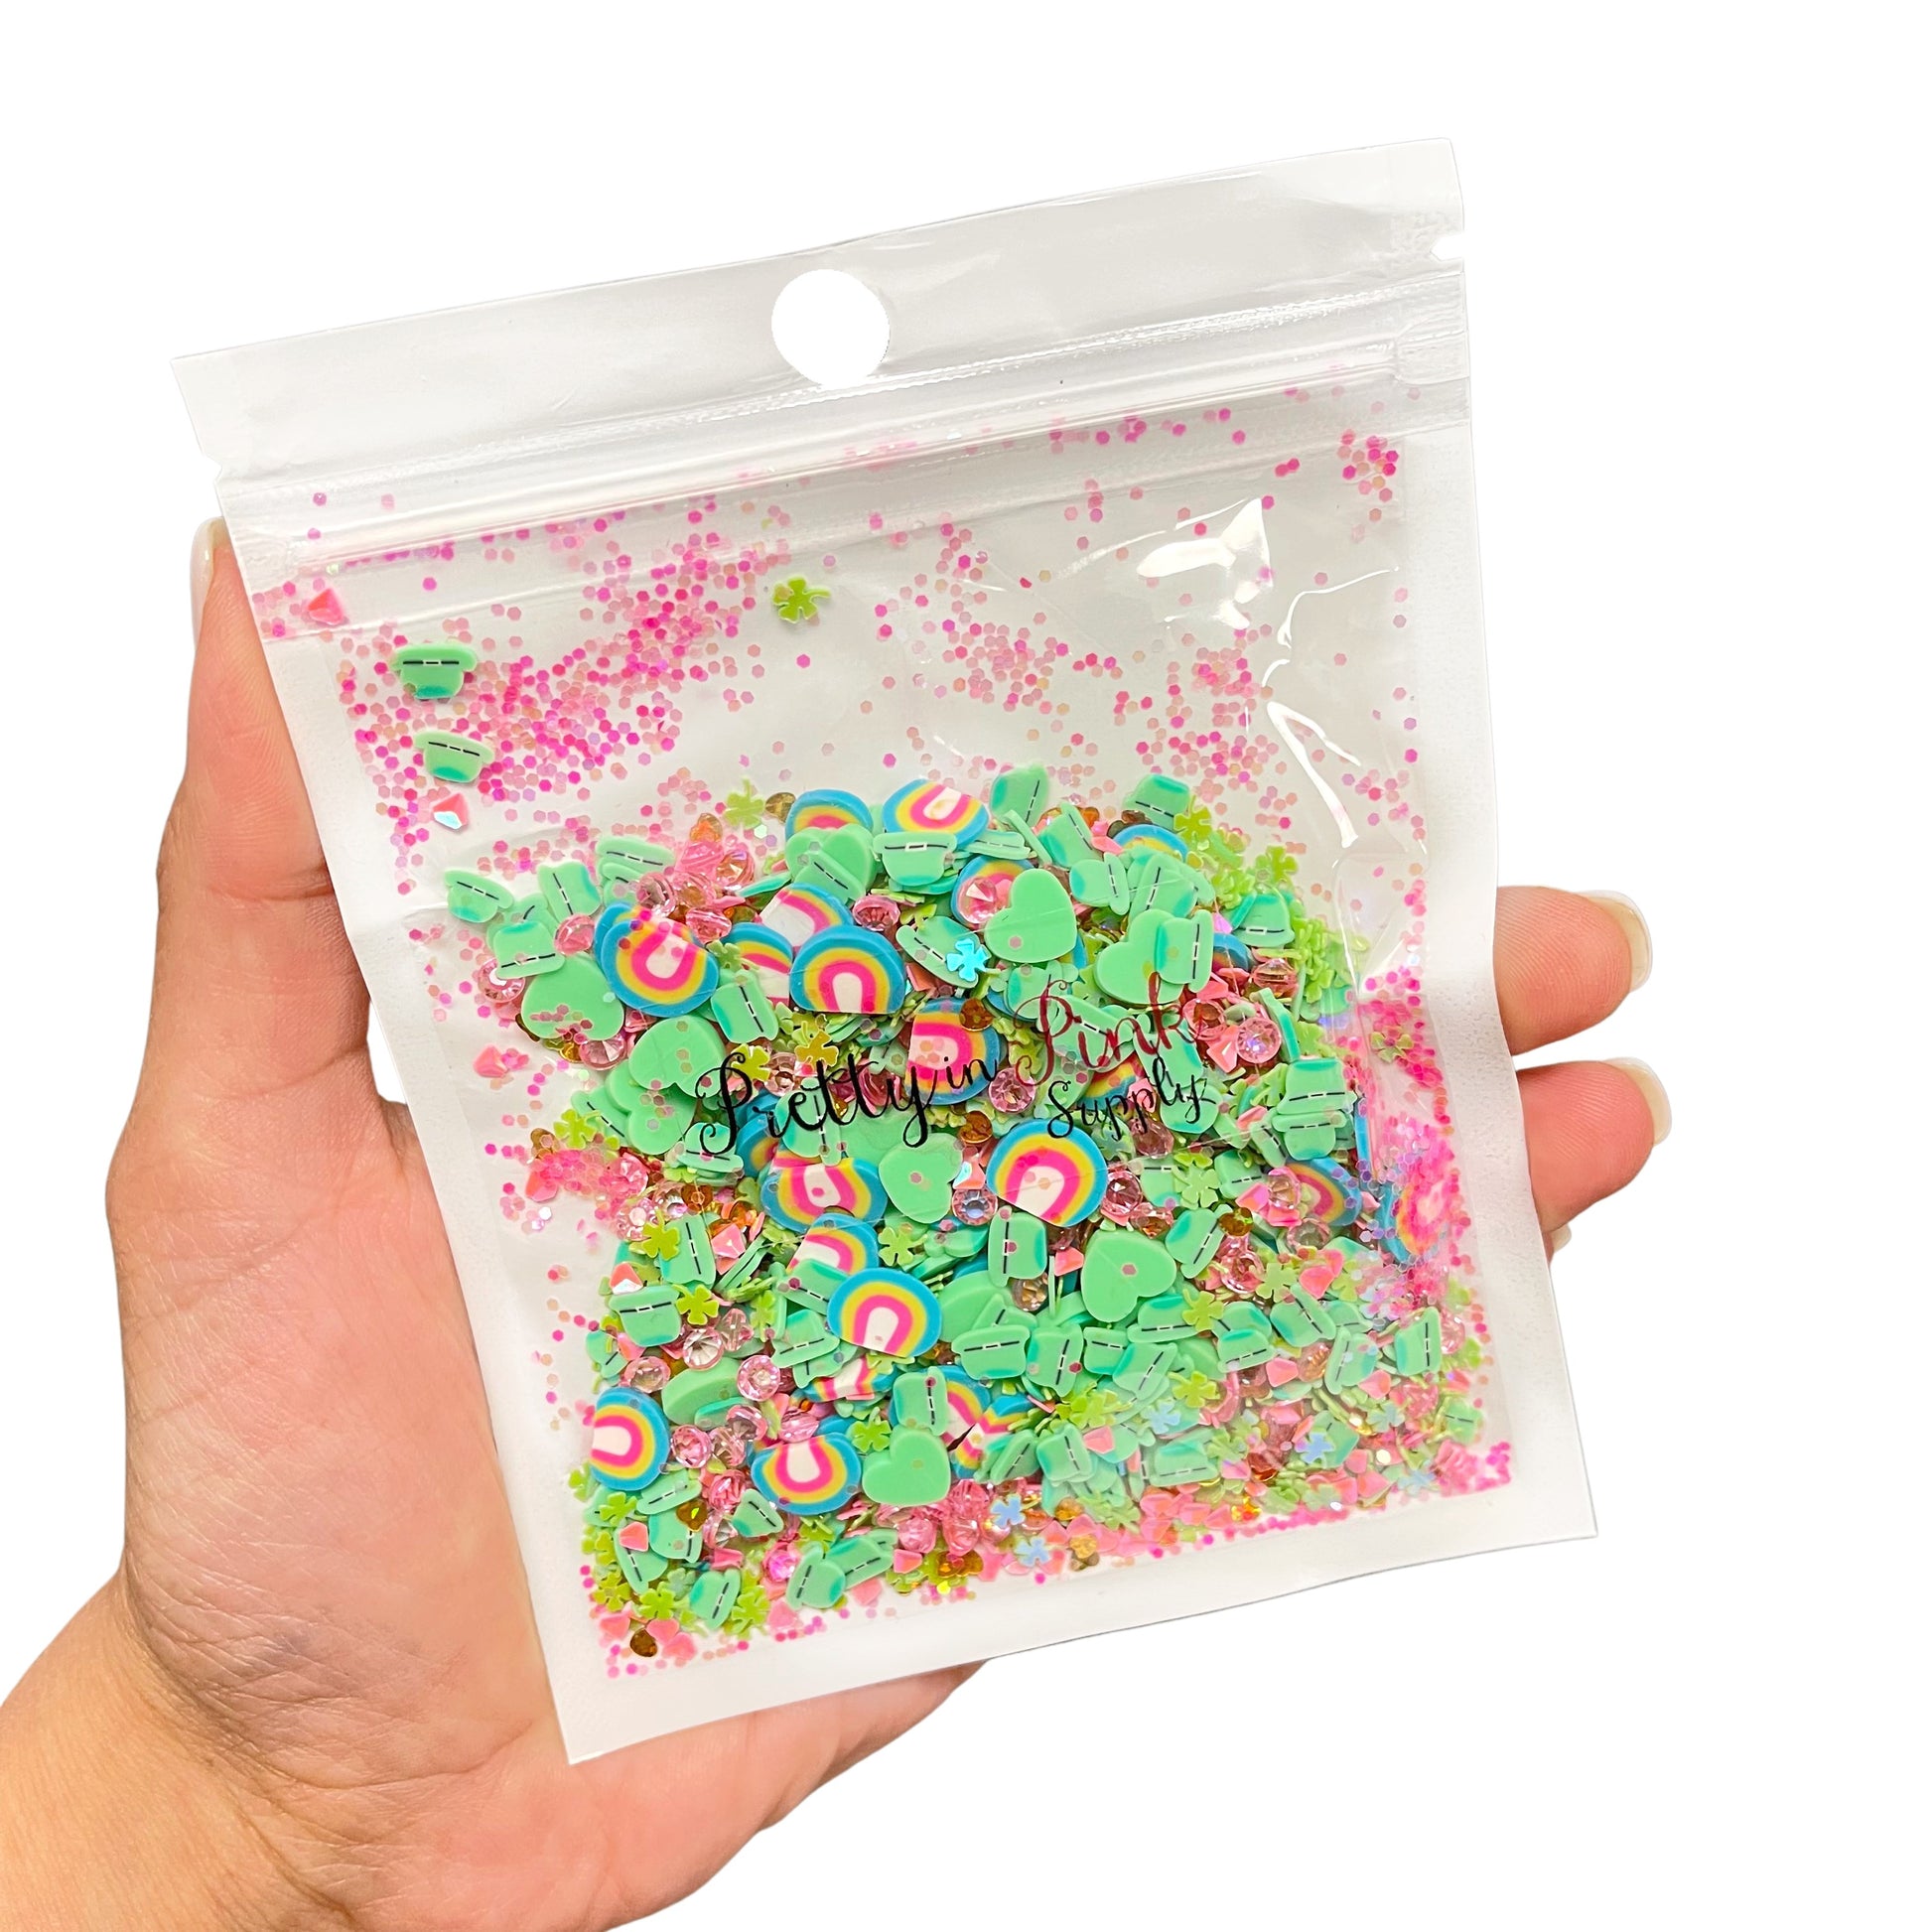 Resealable bag of St. Patrick's Day cay and sequin mix including aqua yellow and pink rainbow clays, green leprechaun hat clays, green heart clay slices, green sequin shamrocks, pink diamonds, and pink sequin glitter..